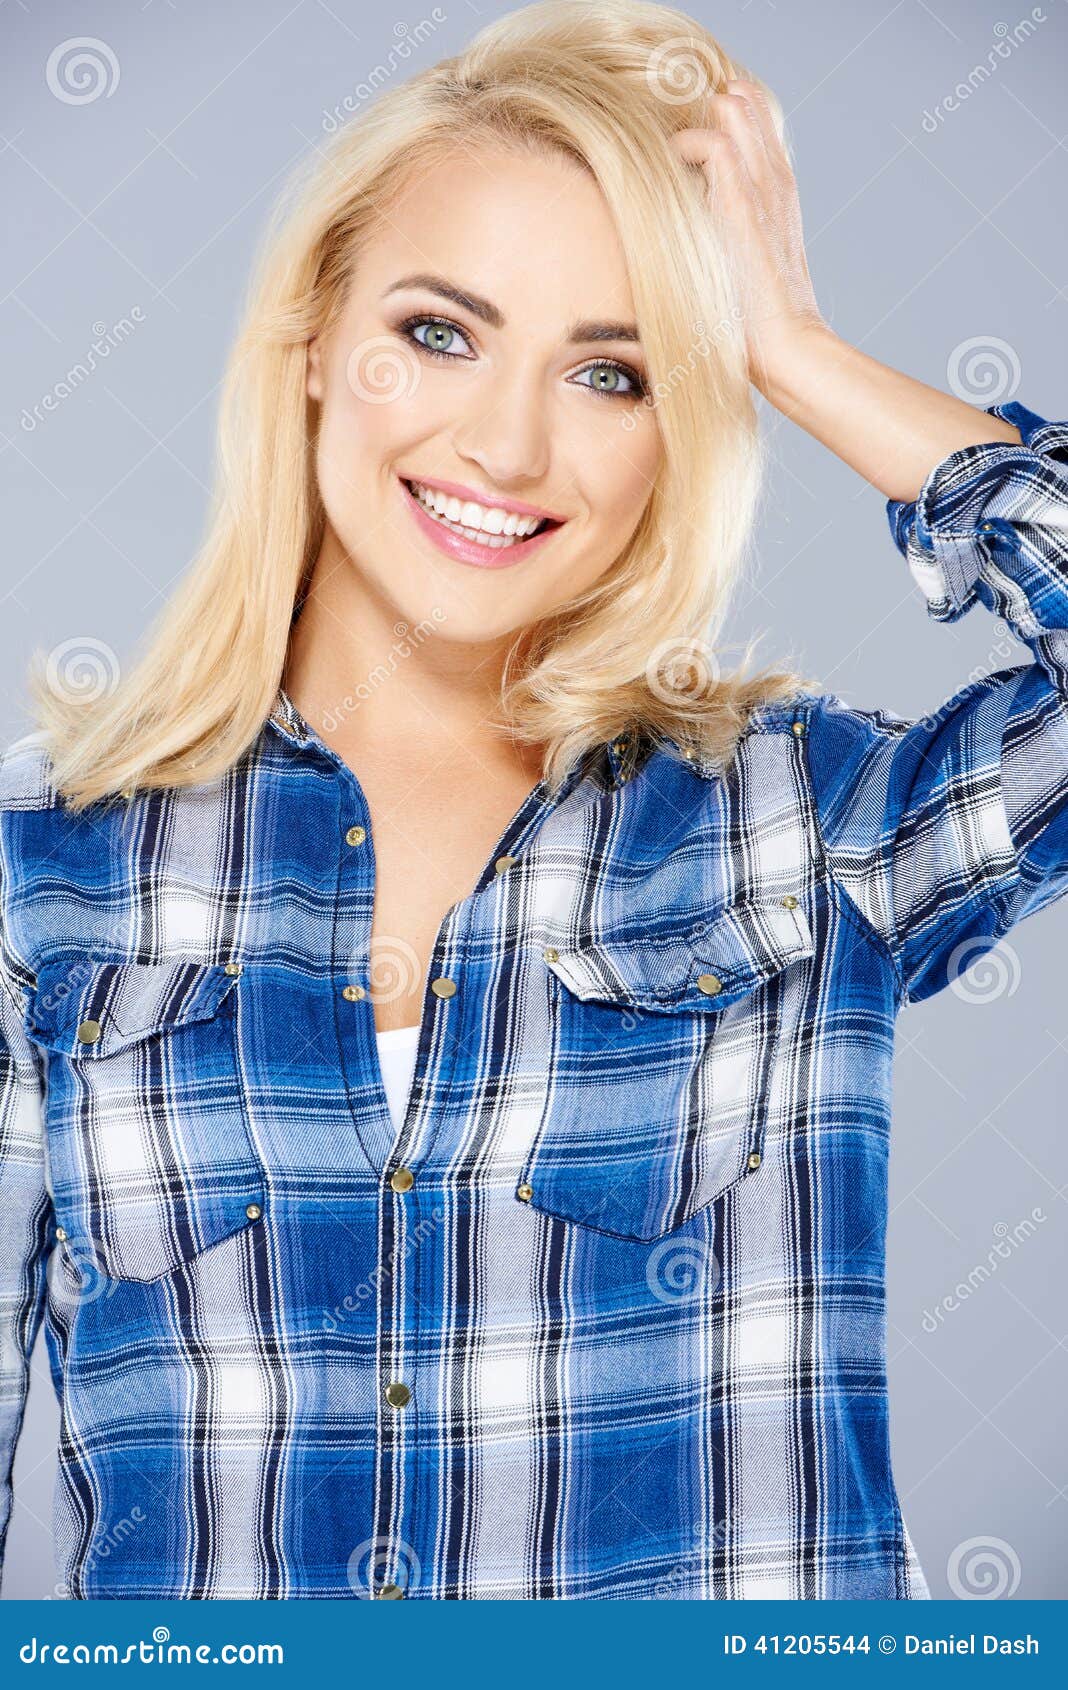 Smiling Healthy Young Blond Woman Stock Photo - Image of blond ...